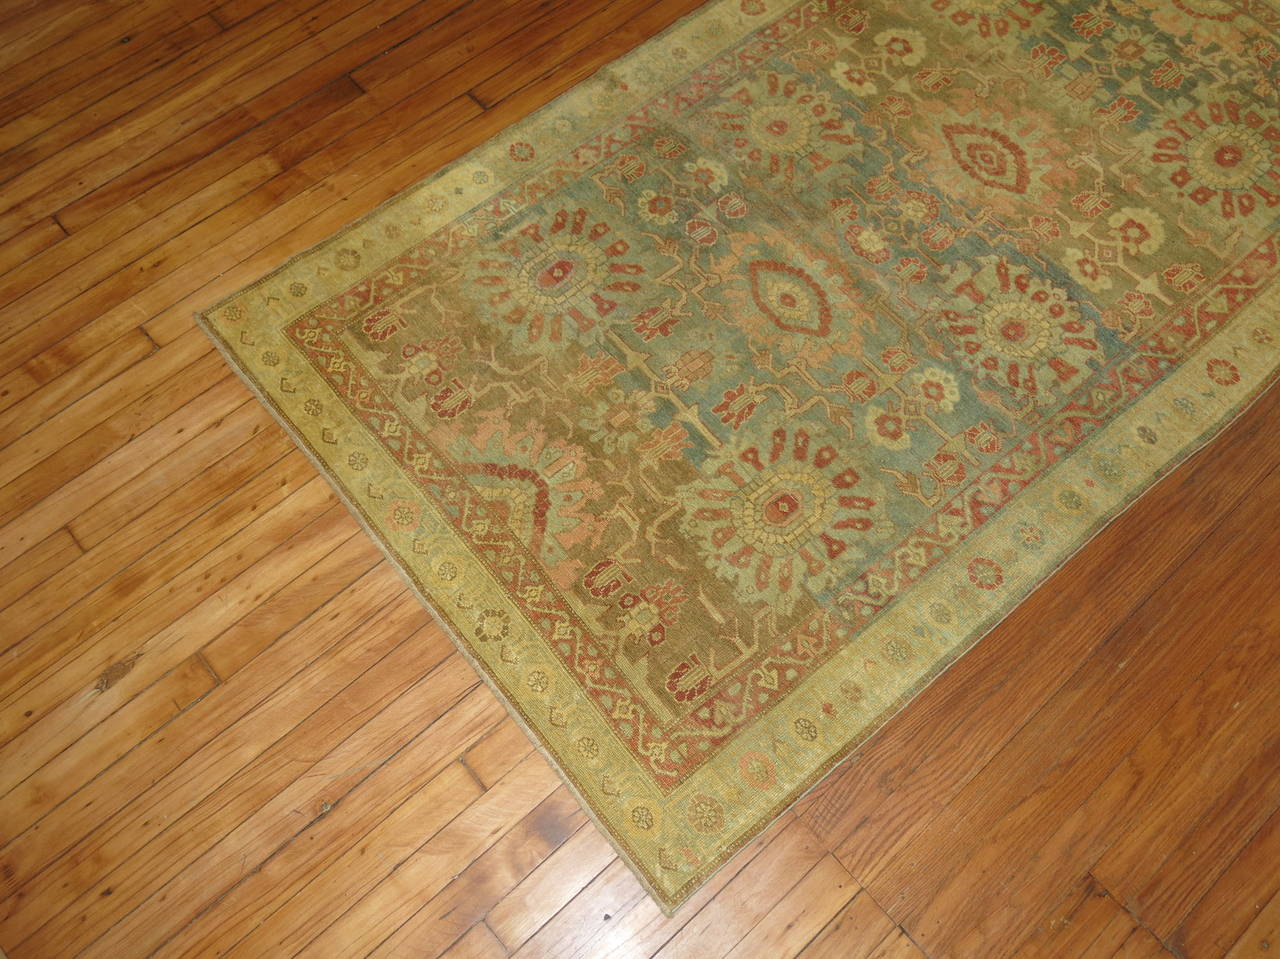 A fine quality early 20th century one of a kind Persian Malayer rug.